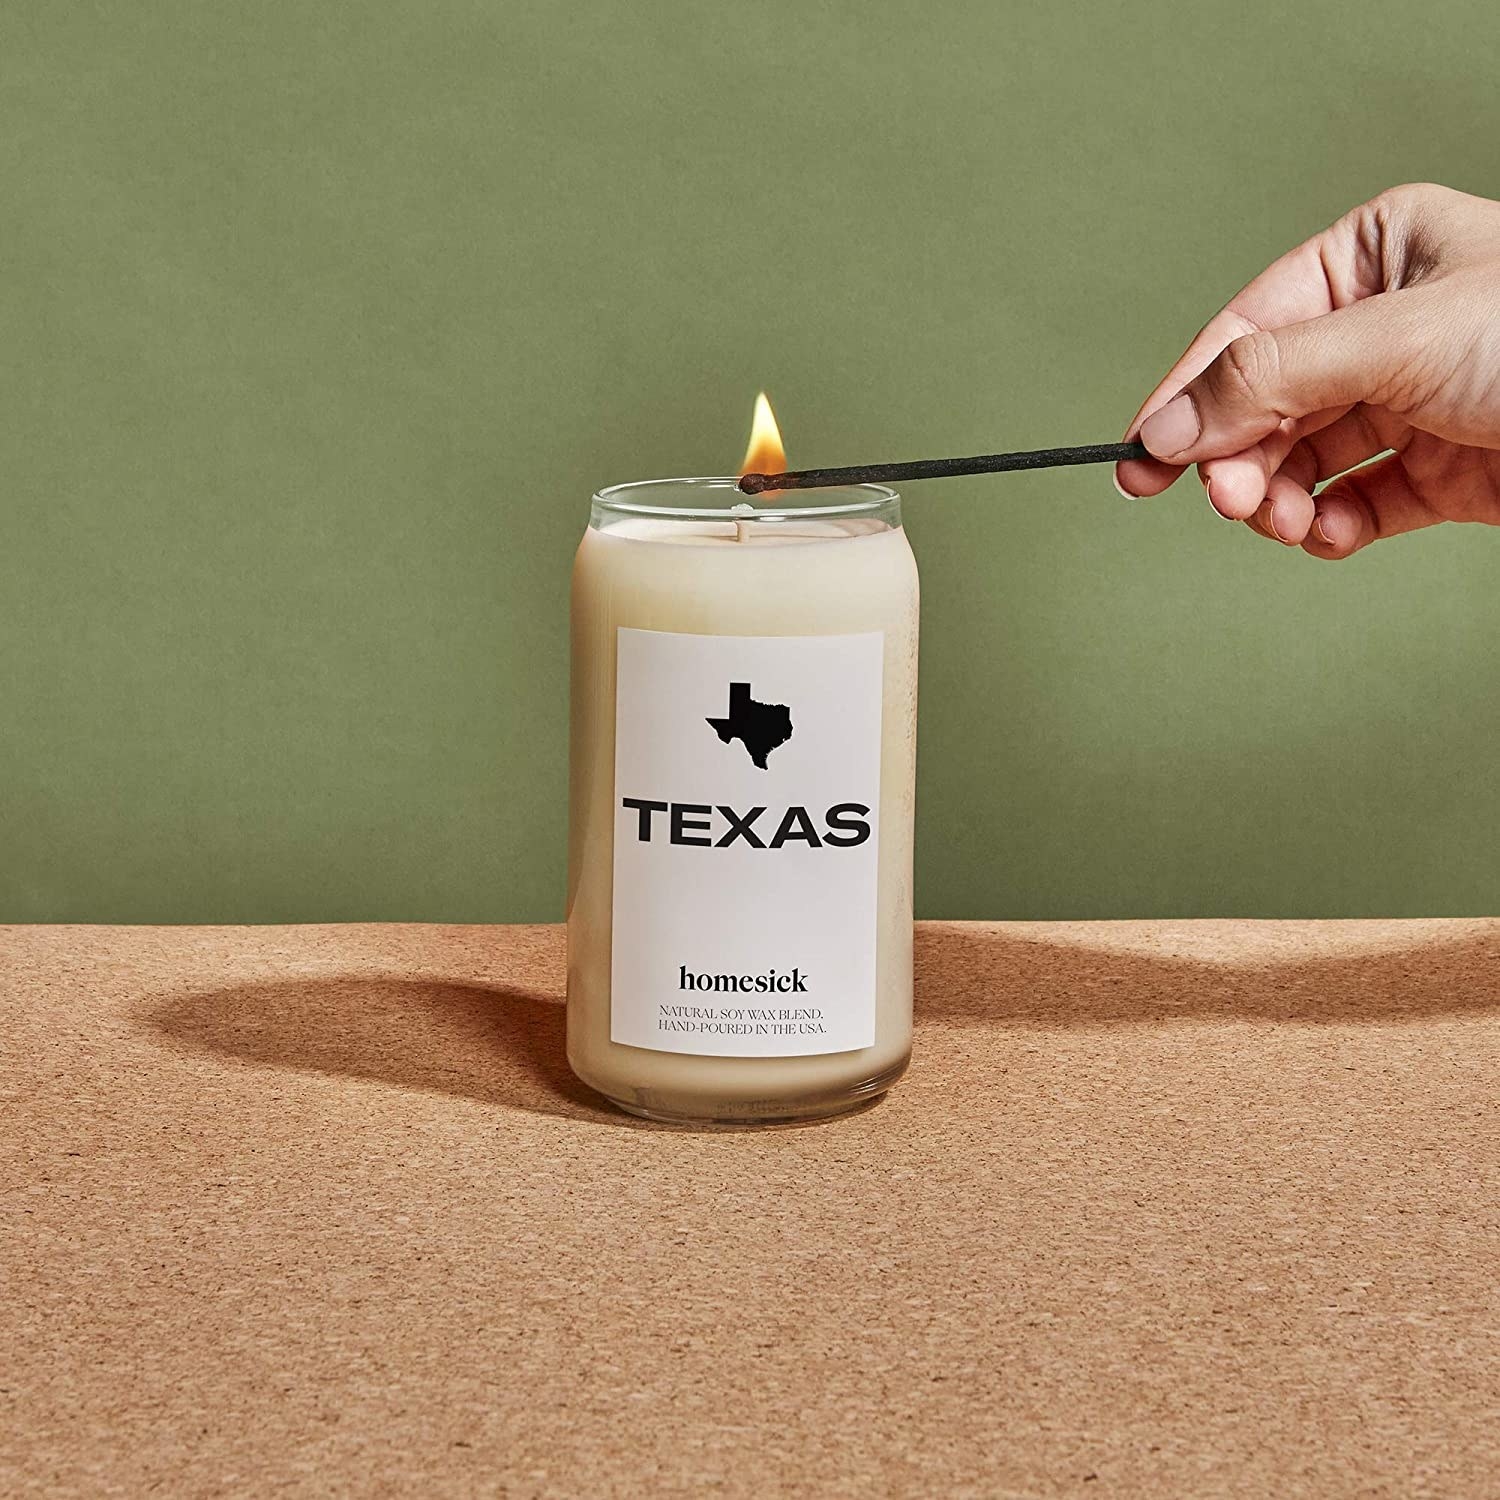 Model lights the Texas candle in front of a green wall